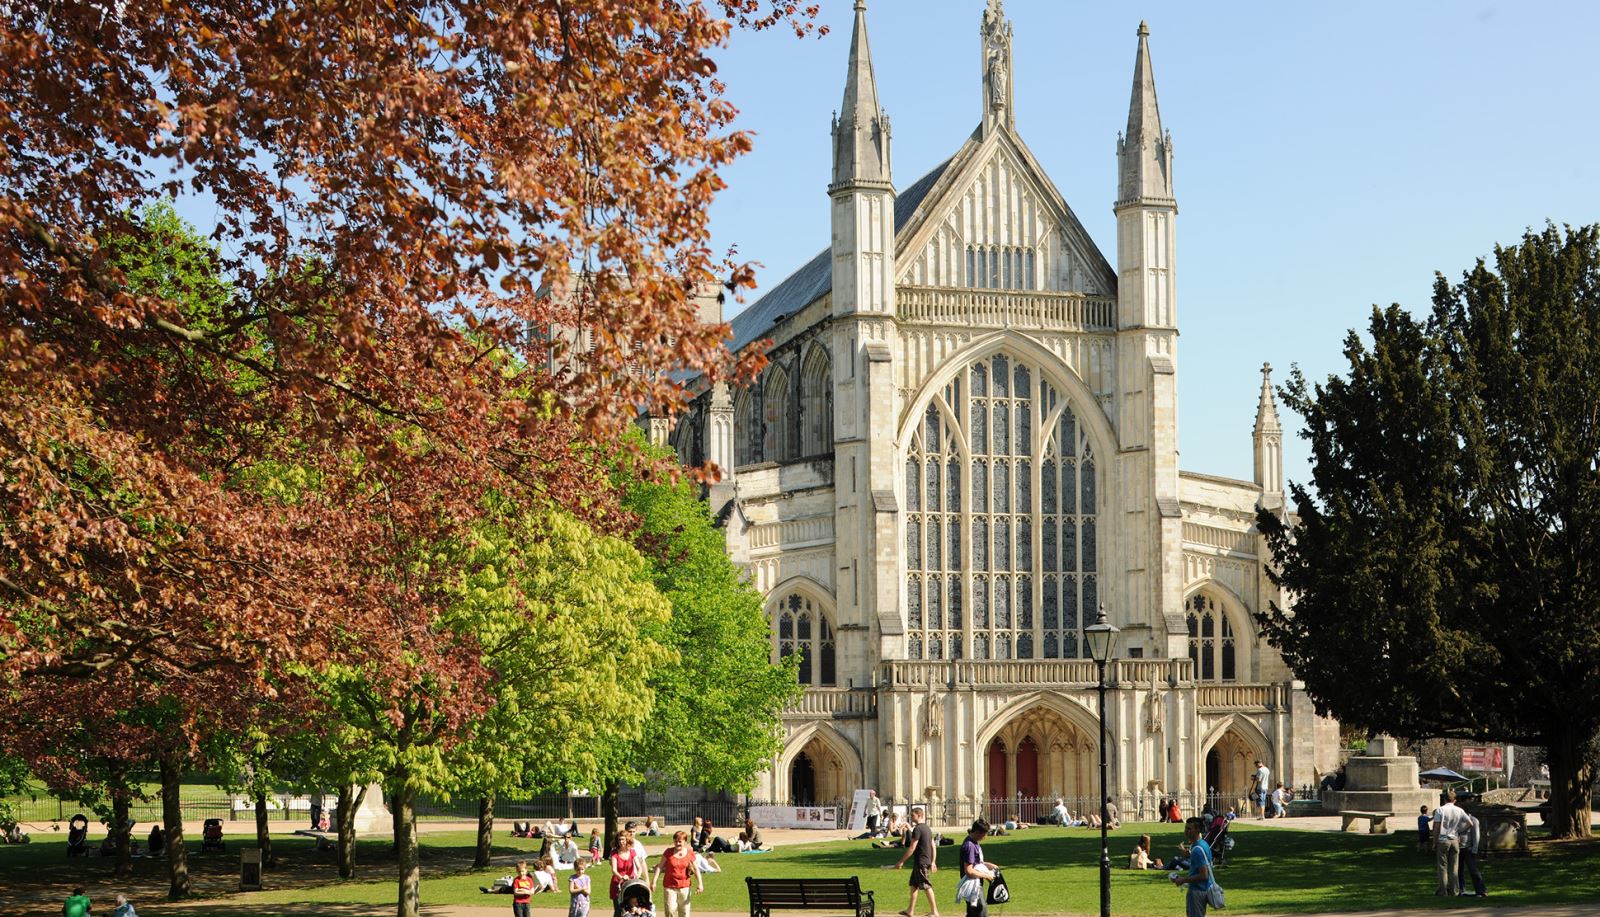 https://www.visit-hampshire.co.uk/dbimgs/Winchester%20Catherdral.jpg